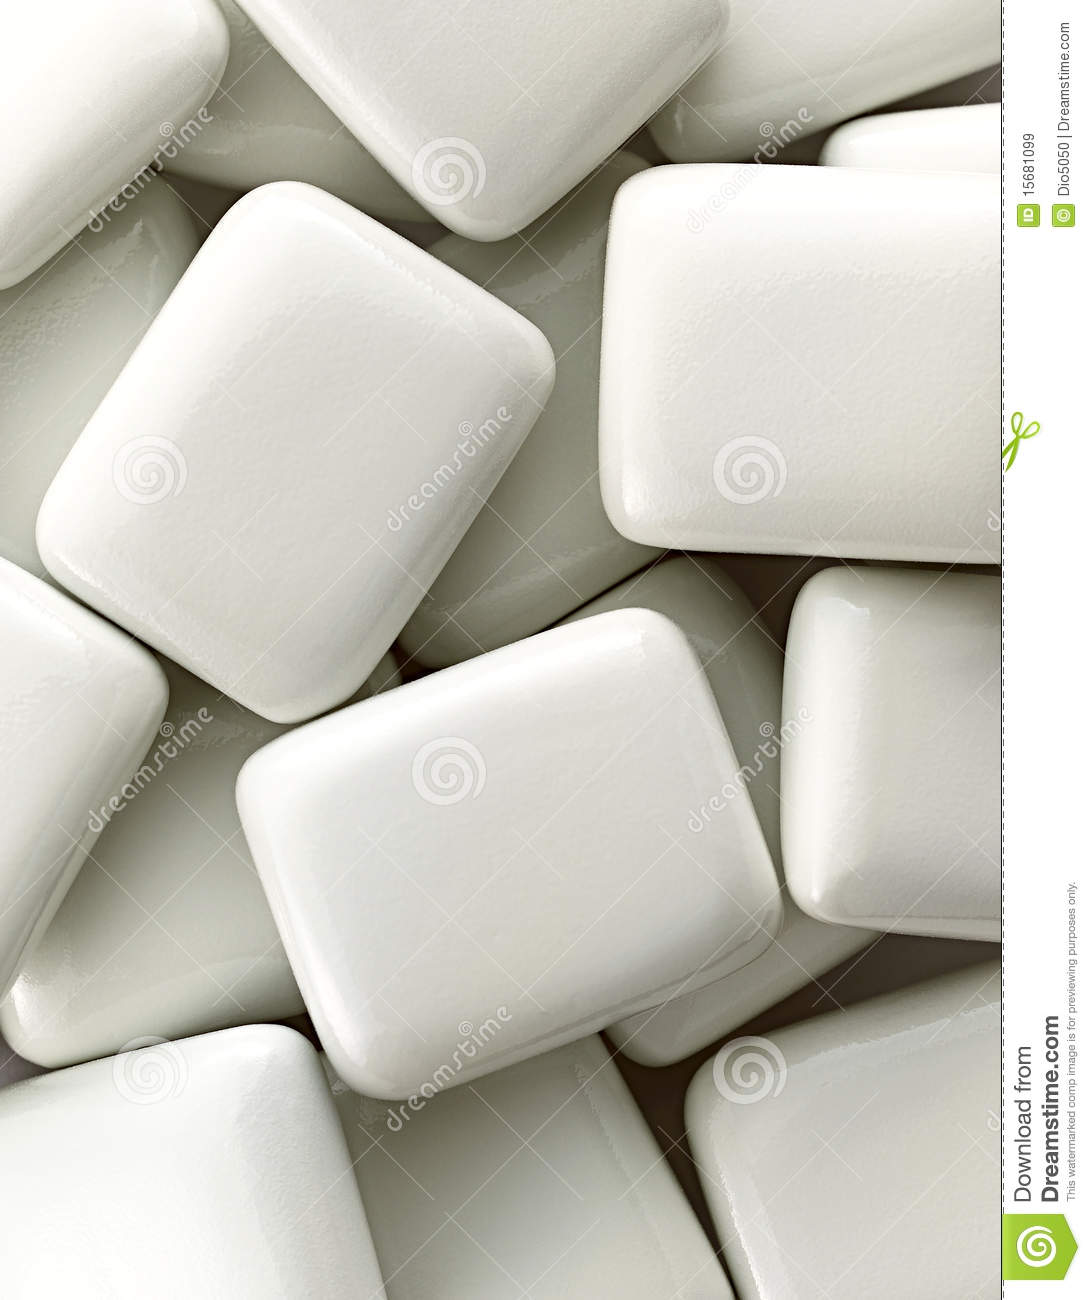 Royalty Free Stock Images  Chiclets  Image  15681099